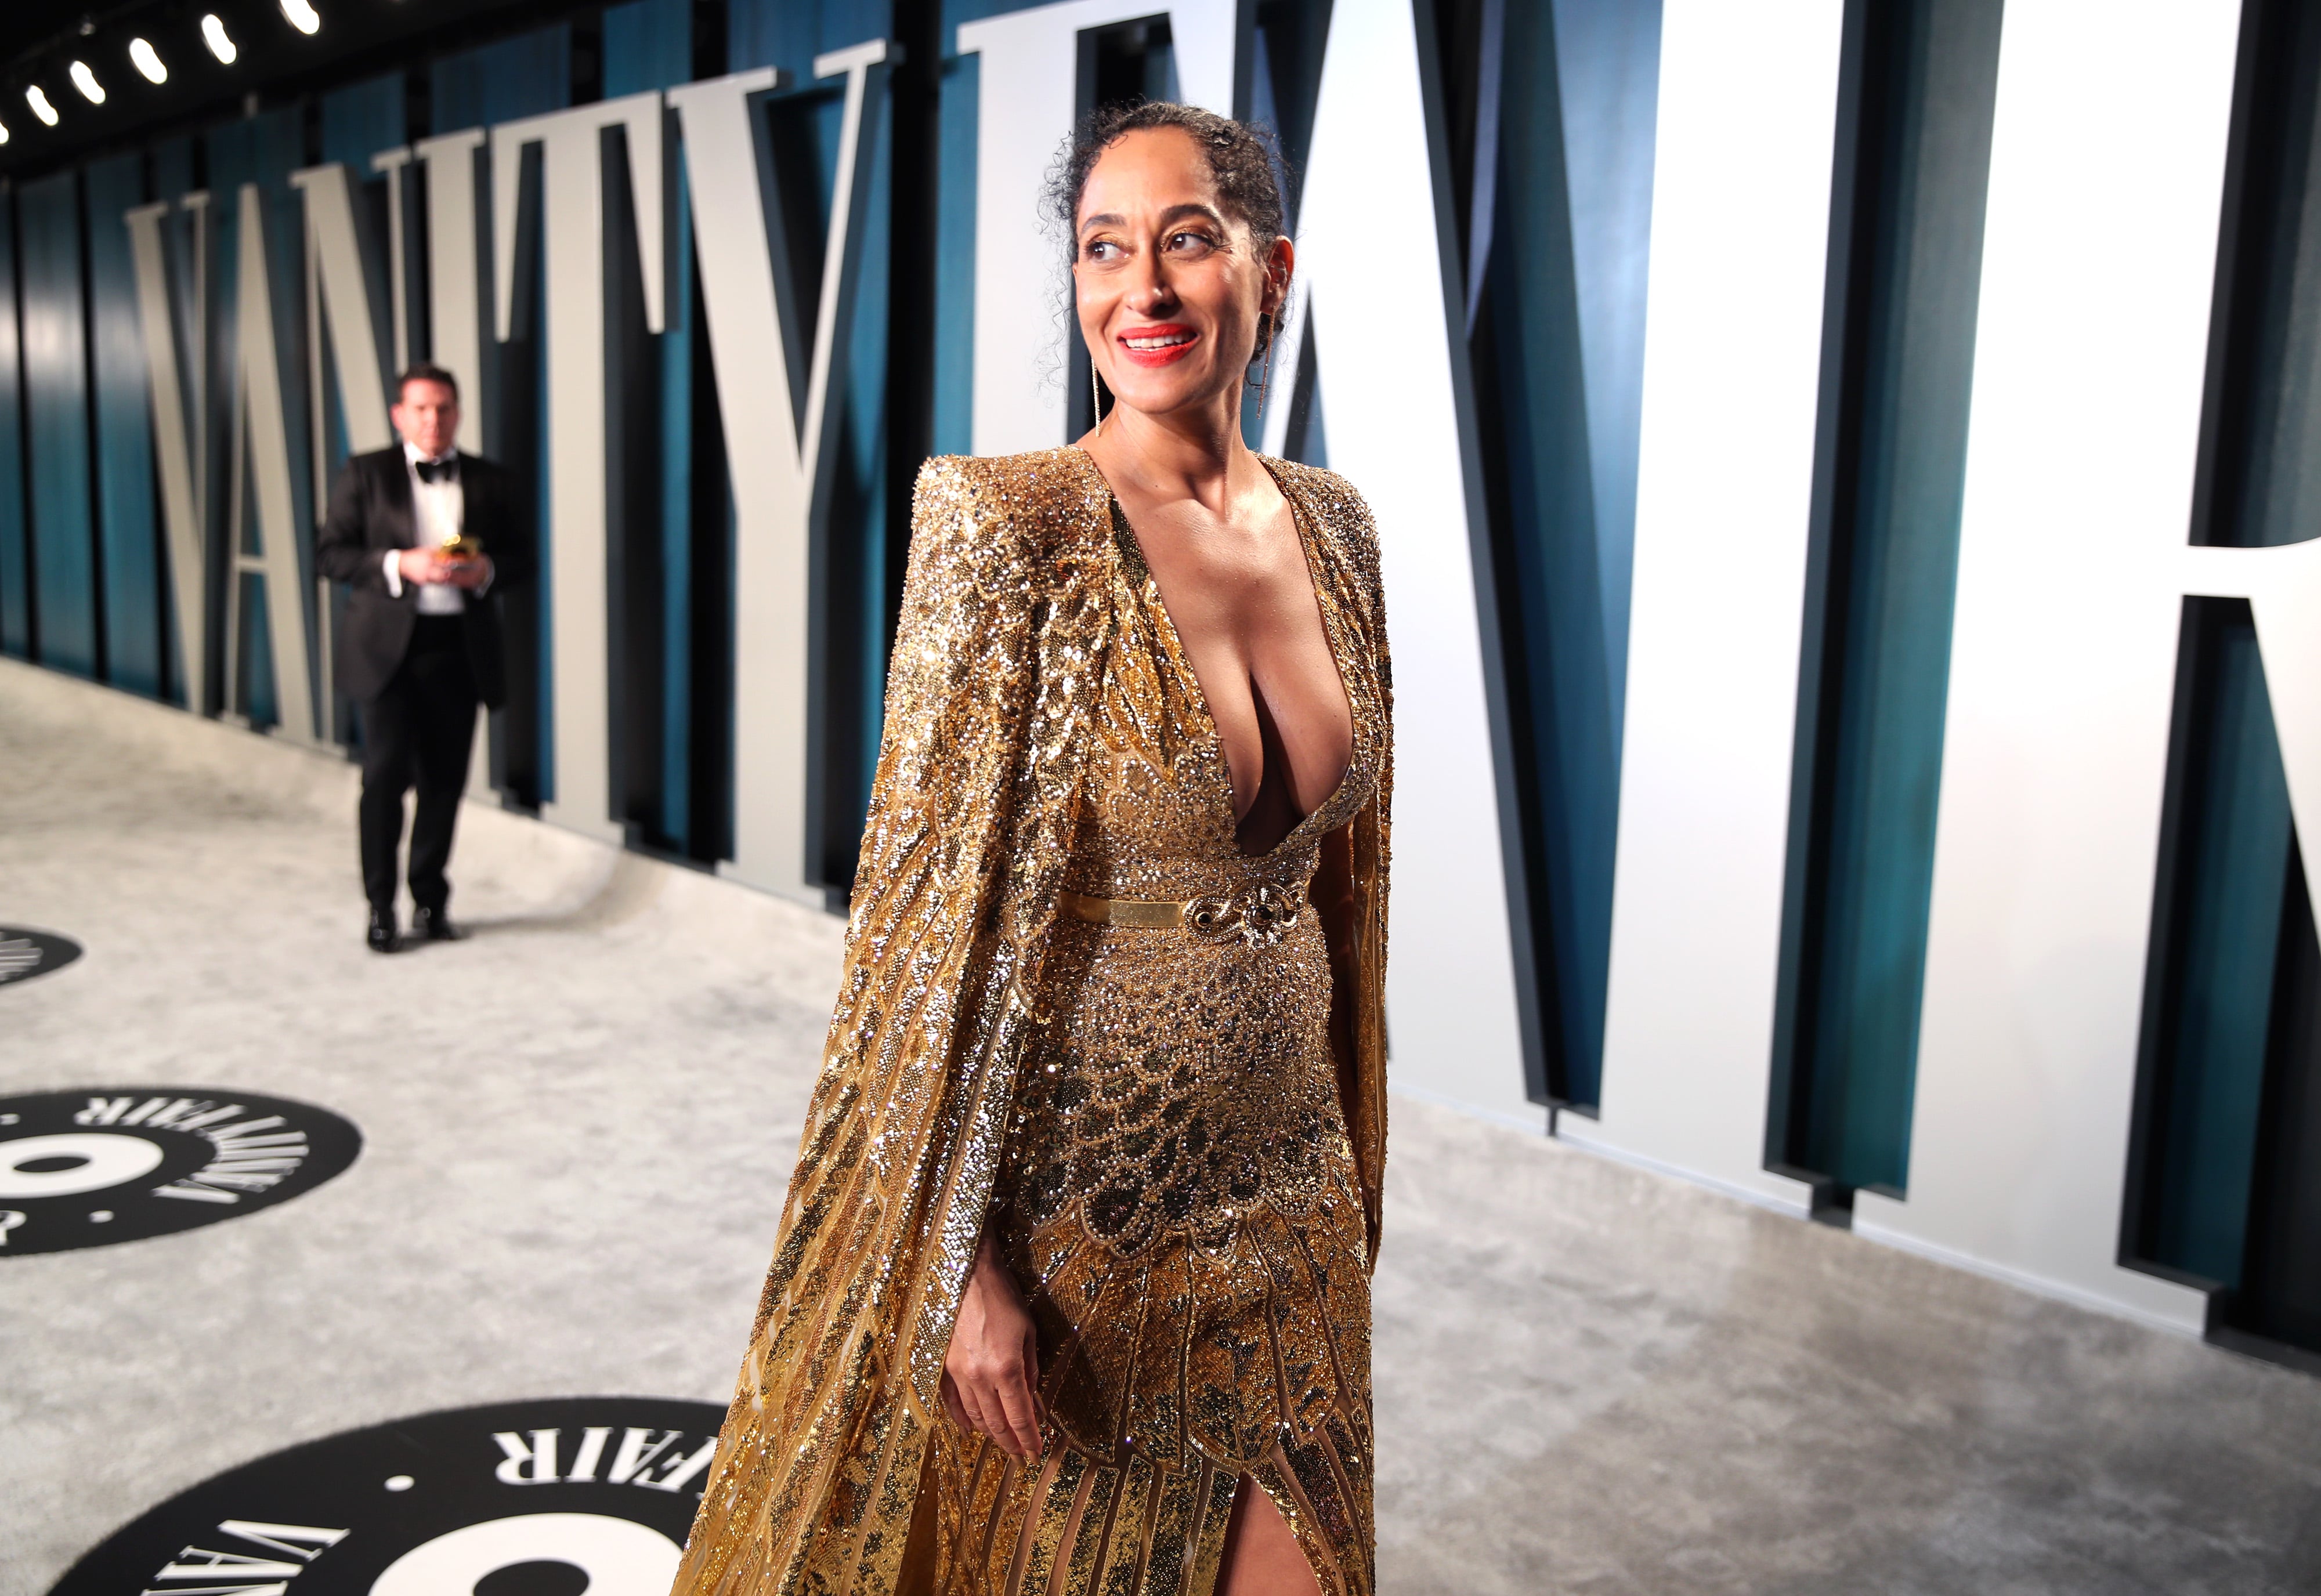 Tracee Ellis Ross Reigns Supreme as She Covers Vanity Fair